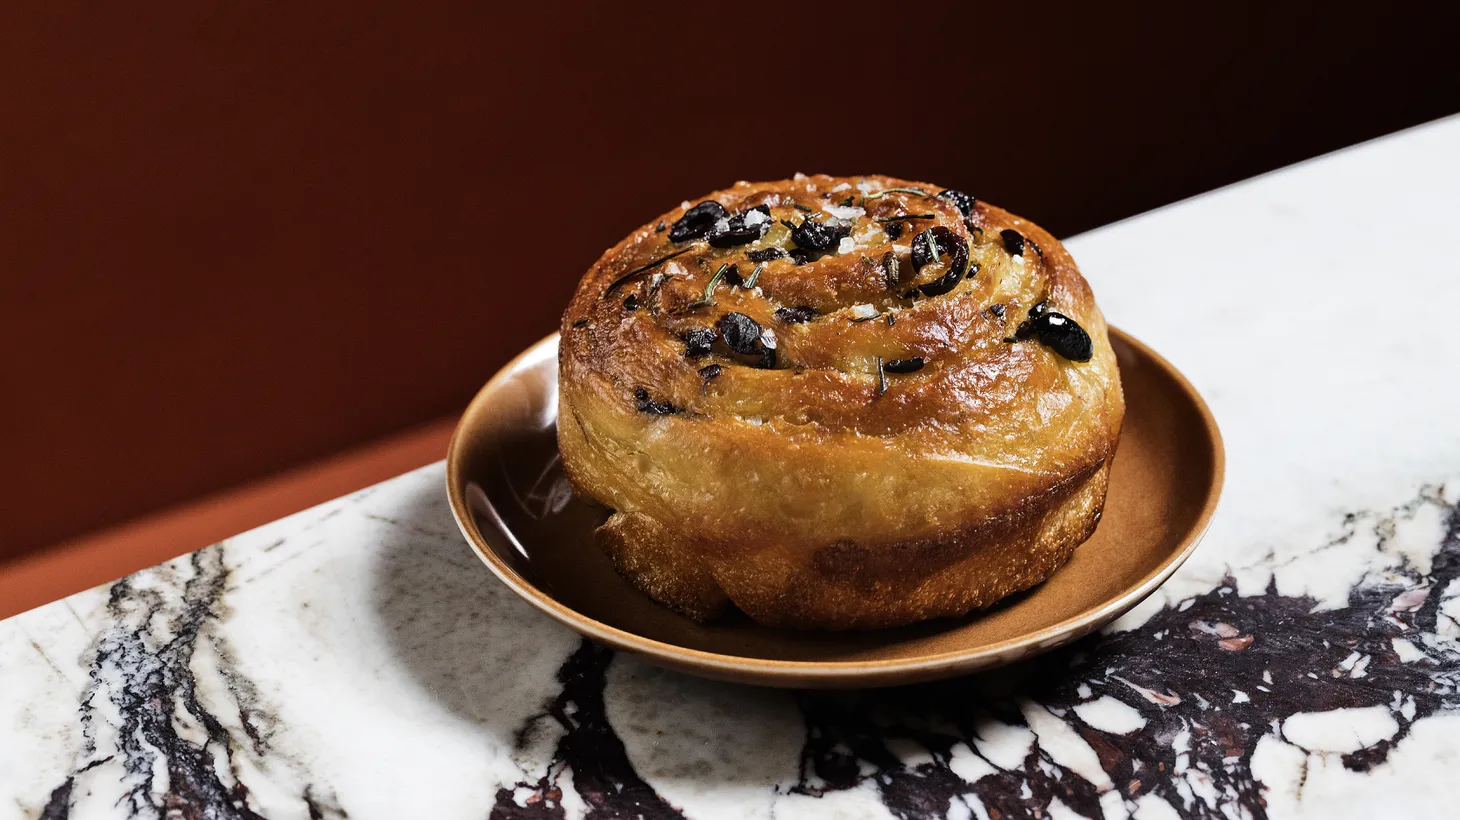 A must-order from Bacetti is the focaccia ebraica, made with black olives, currants, rosemary, and sea salt.